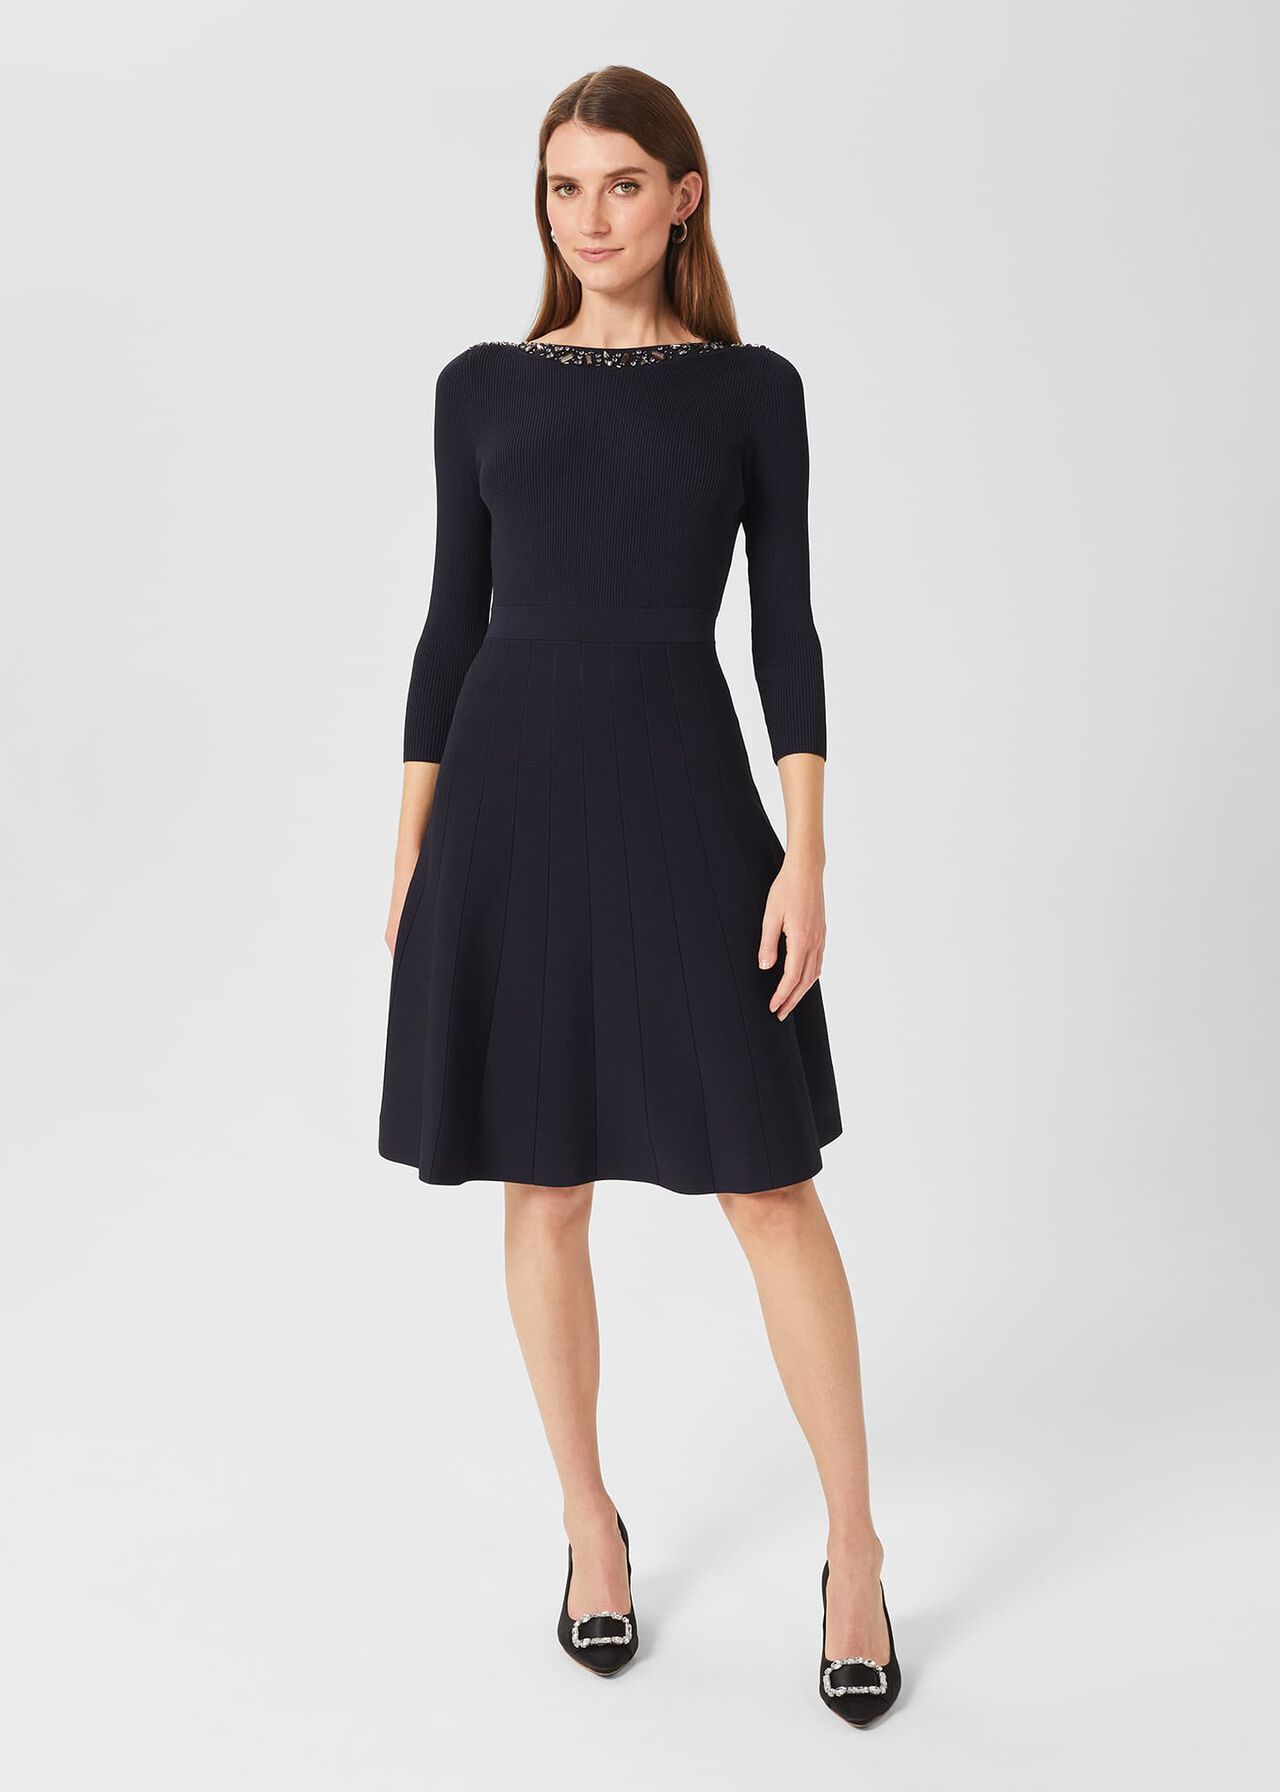 Emily Knitted Sequin Dress, Navy, hi-res